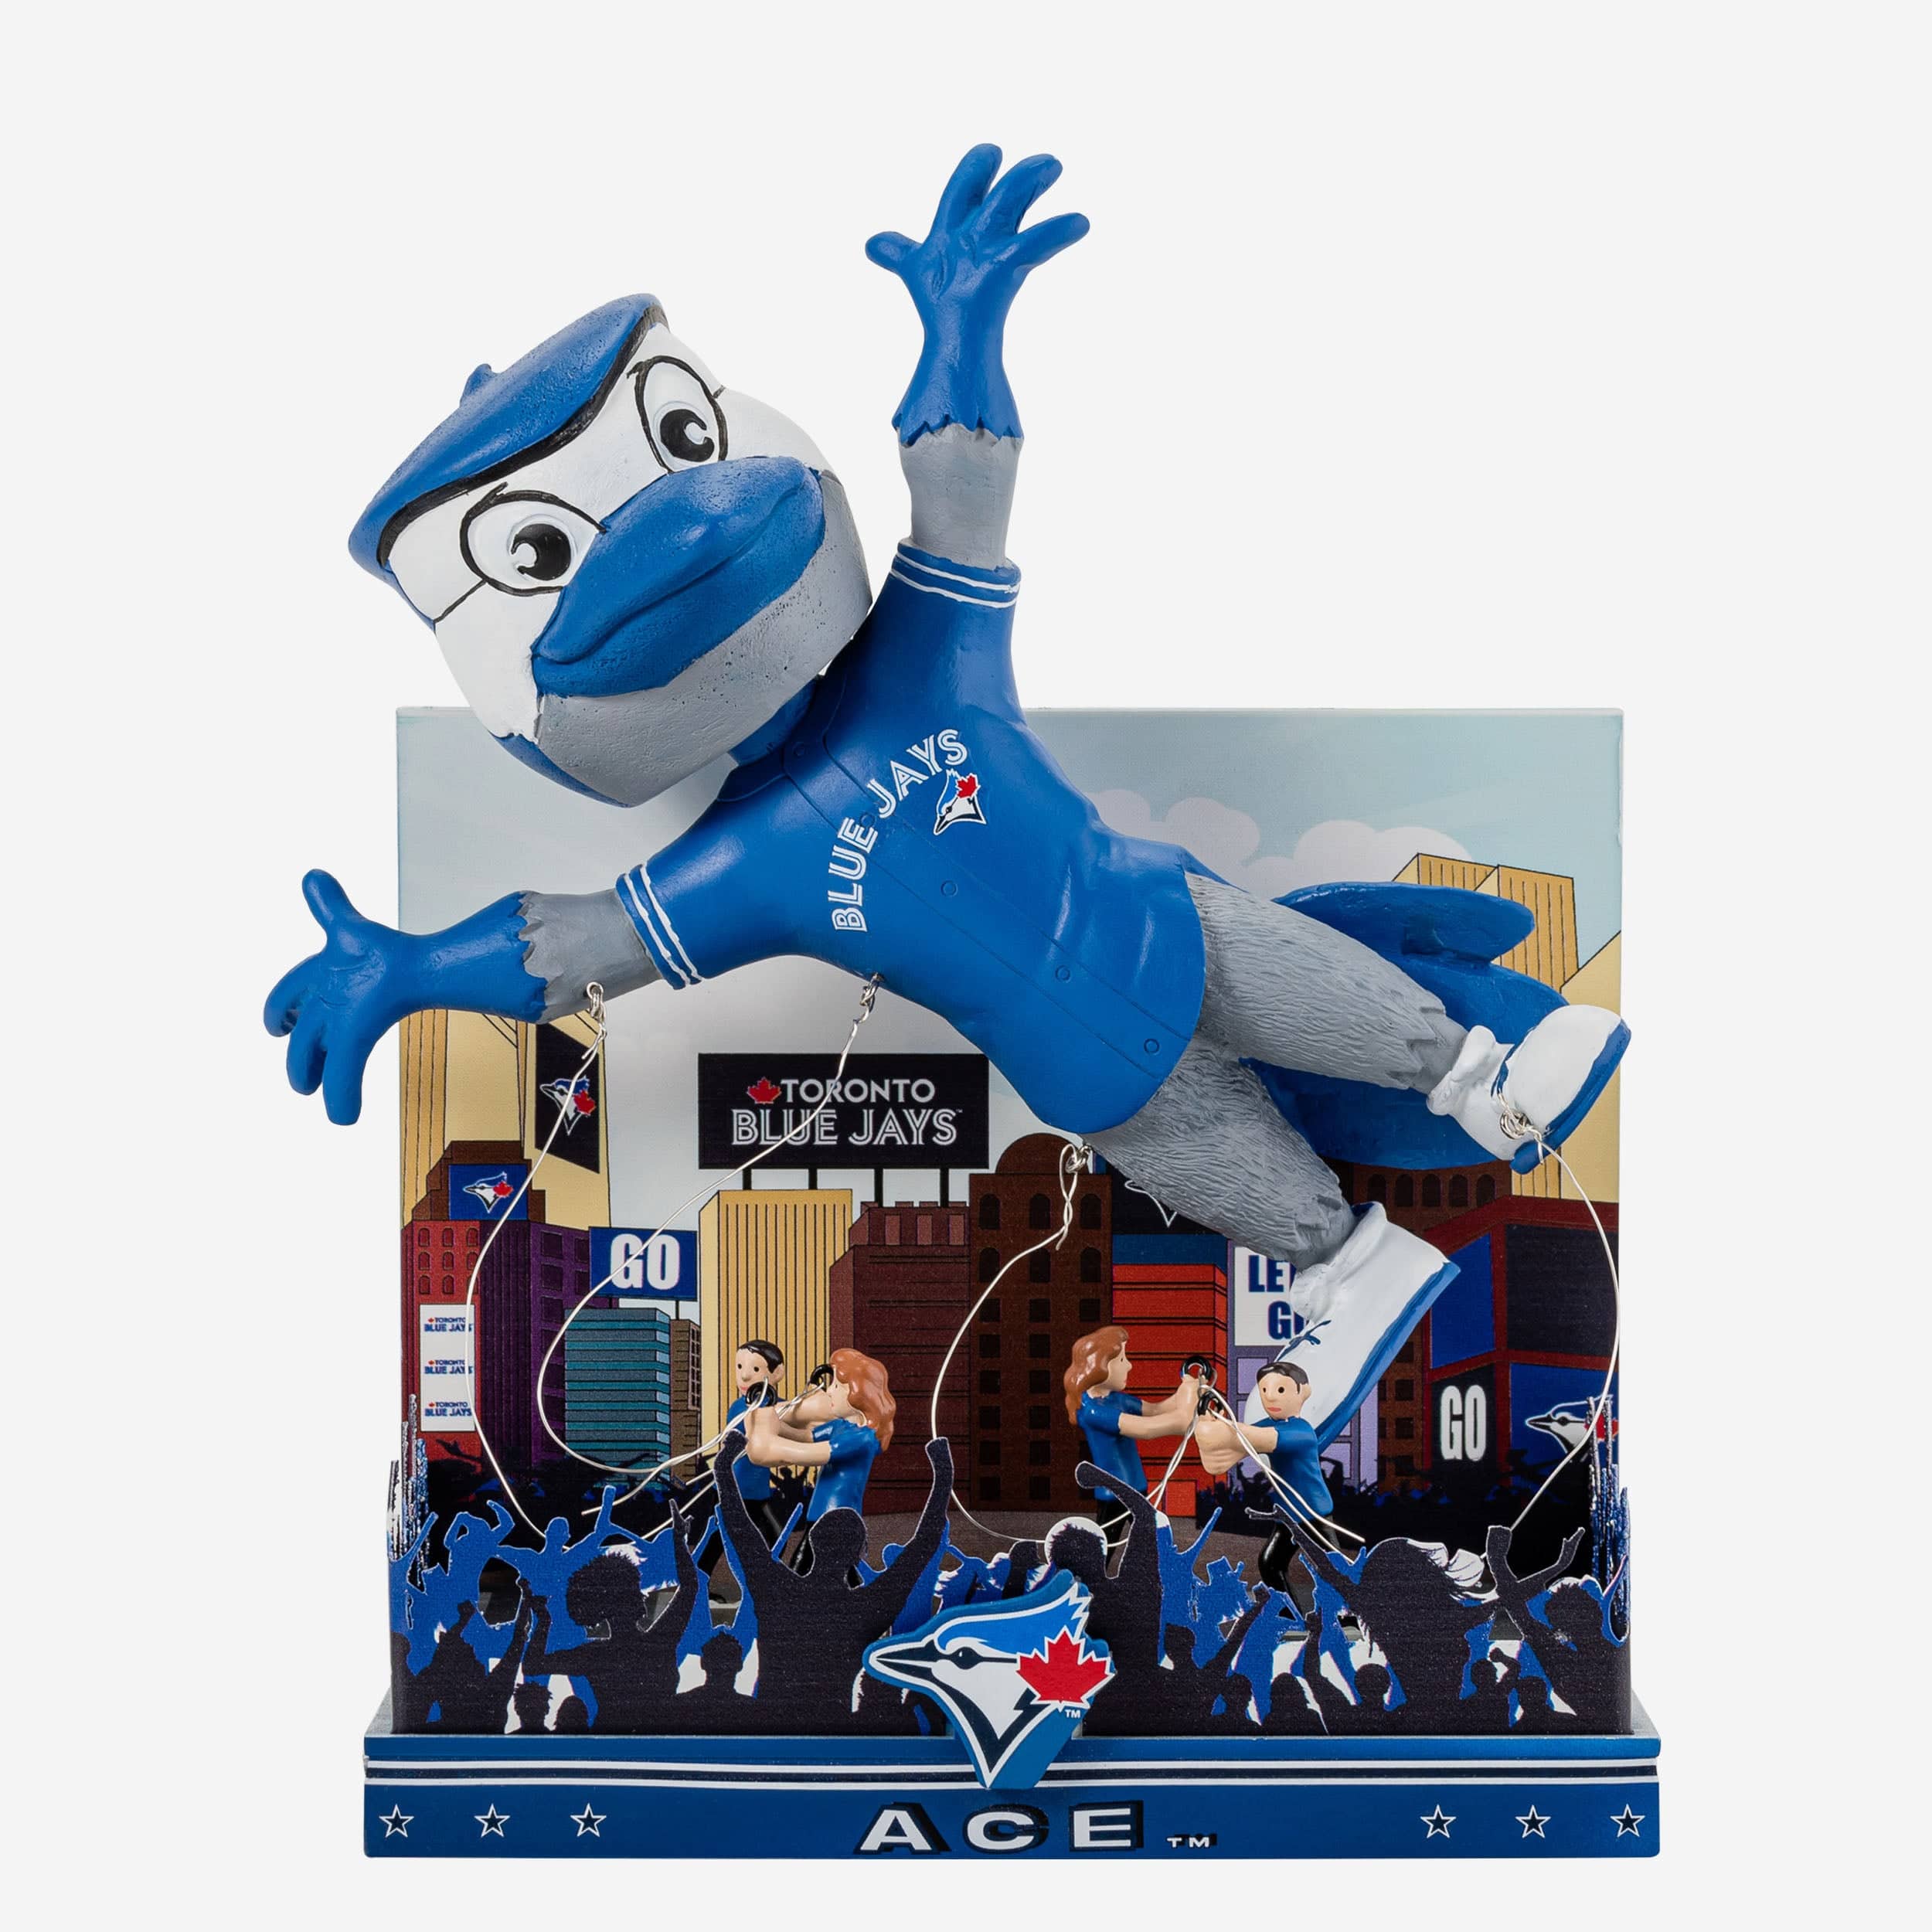 Ace Toronto Blue Jays Thanksgiving Mascot Bobblehead Officially Licensed by MLB